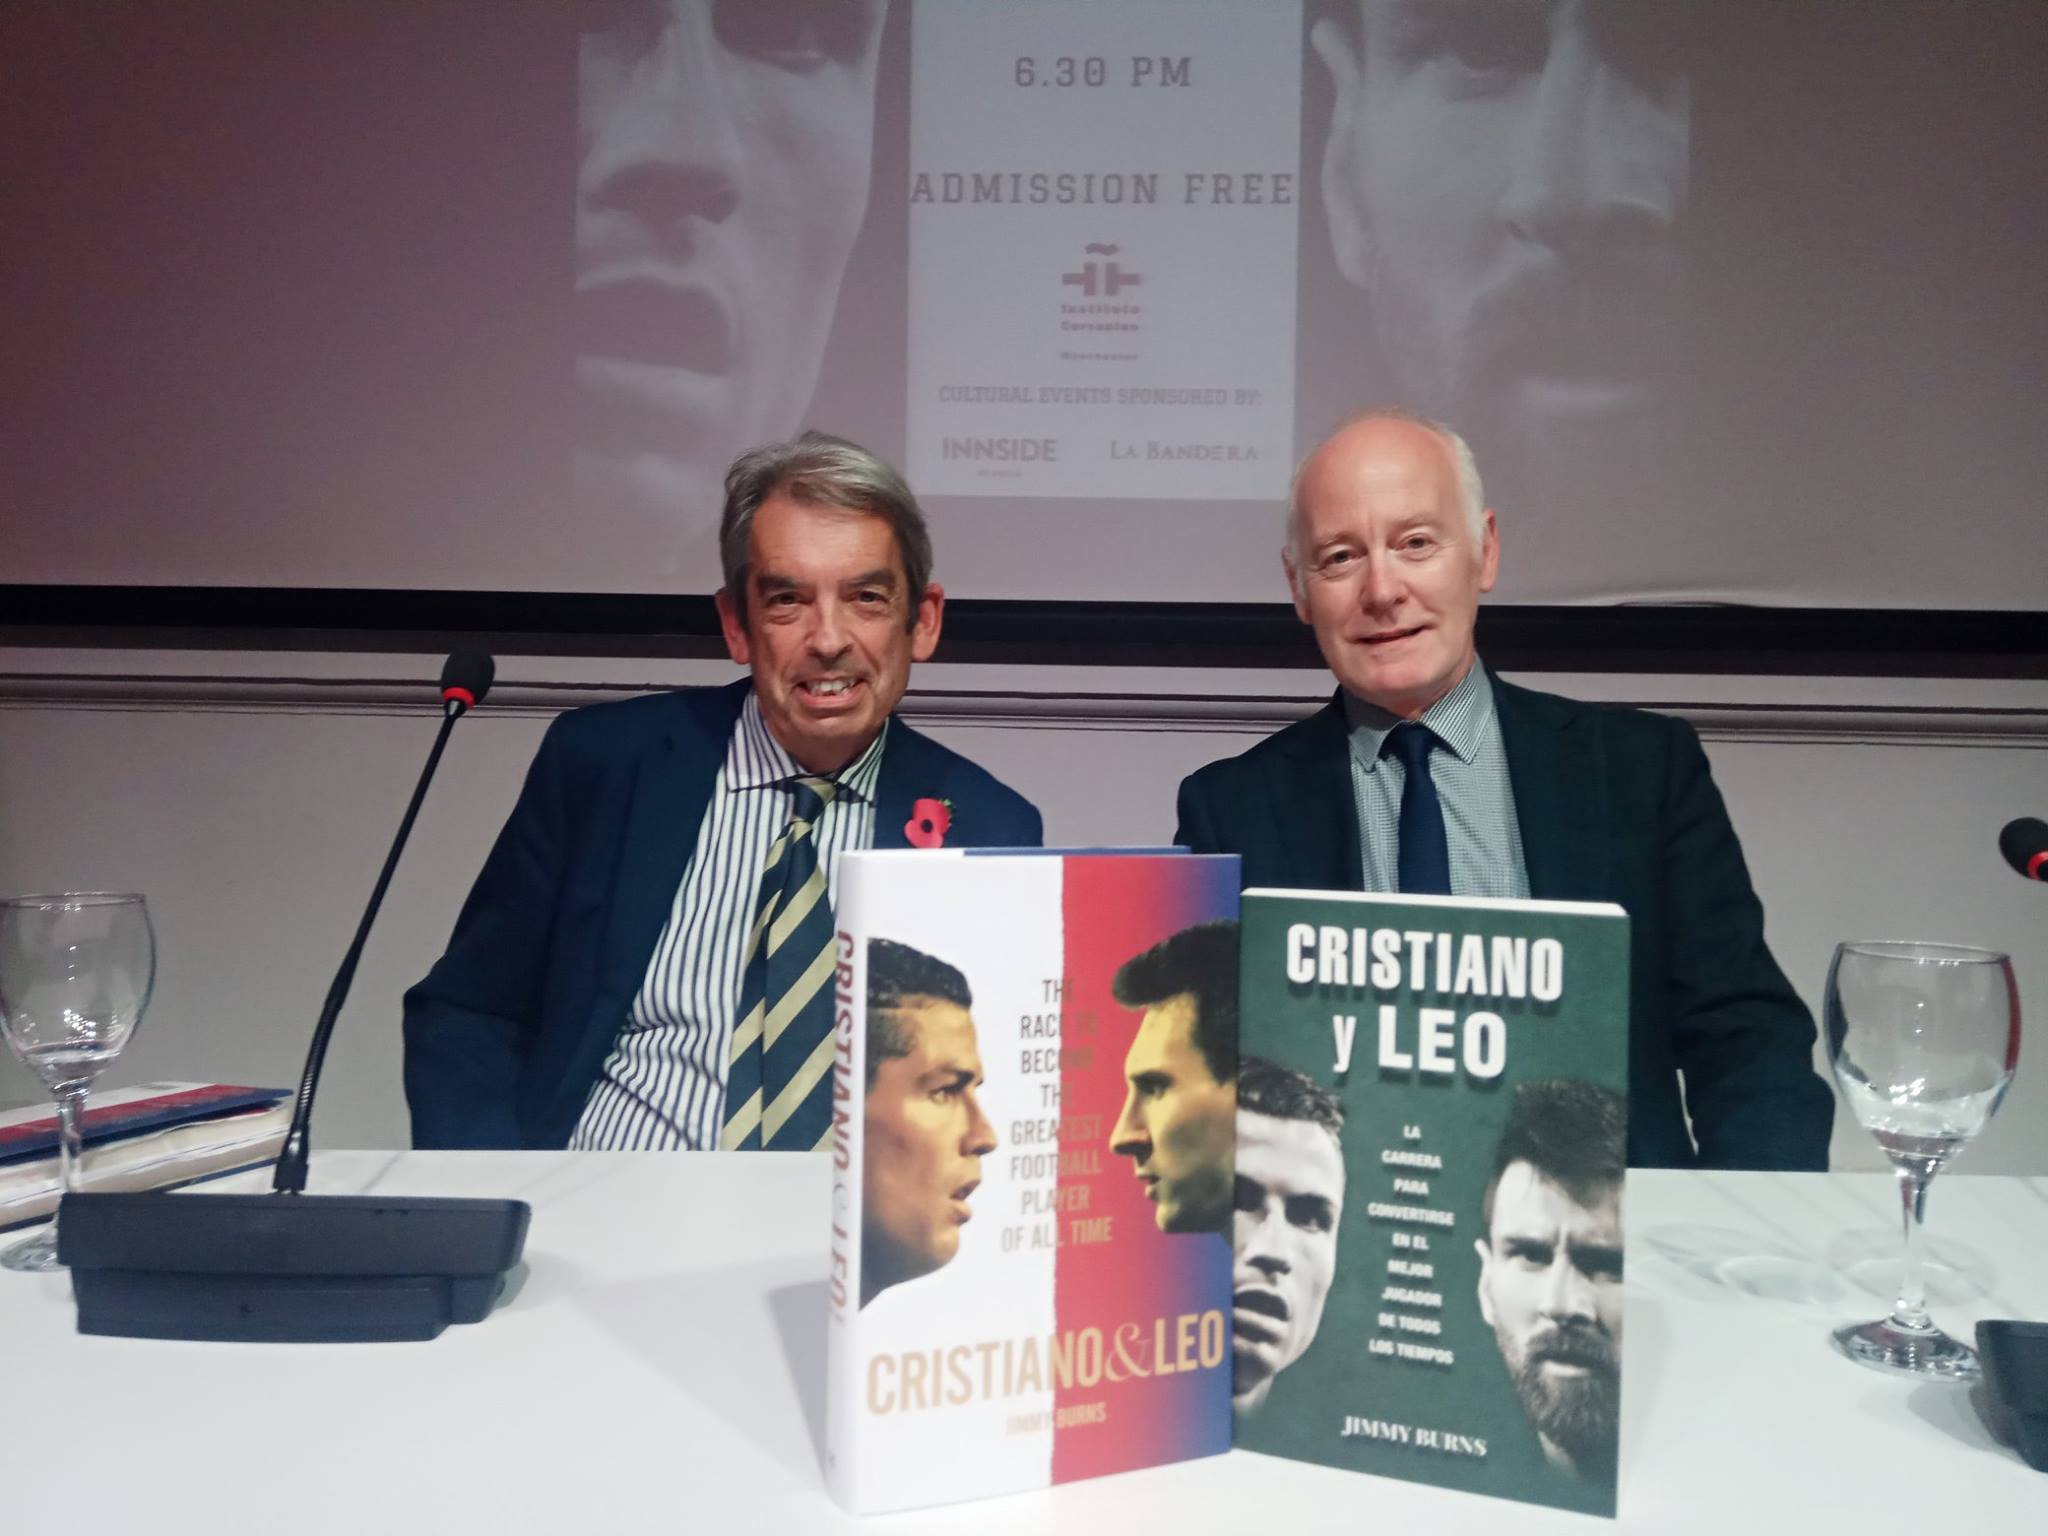 Dr Karl McLaughlin (right)  chaired the launch of a new book by Spanish-British football expert and author Jimmy Burns.